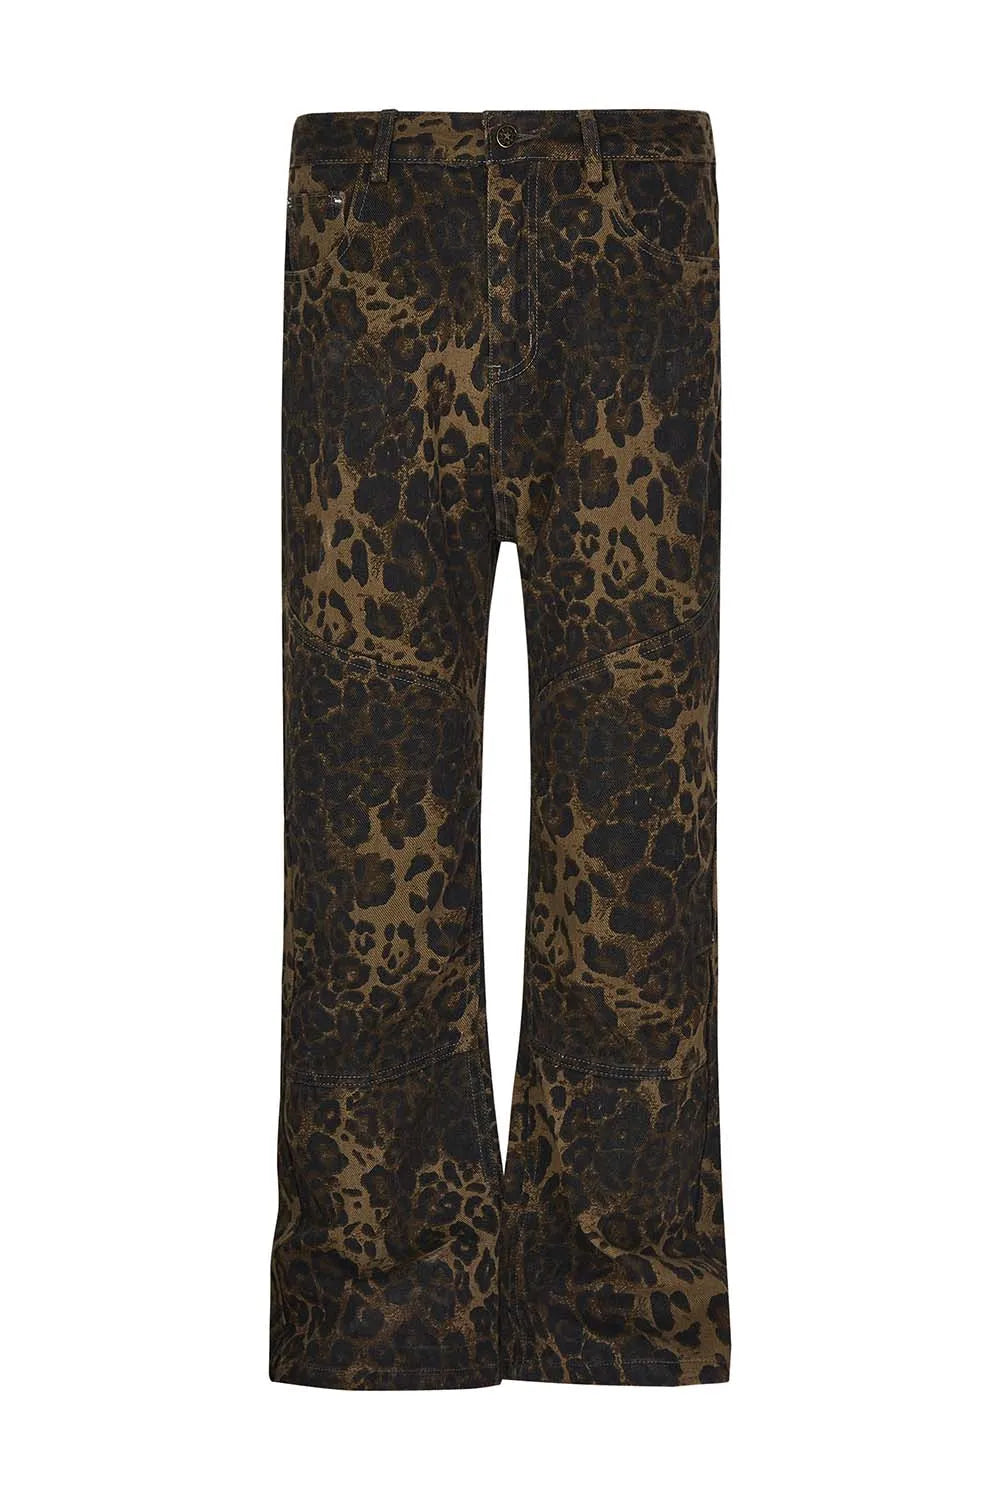 MADE EXTREME Leopard Pant